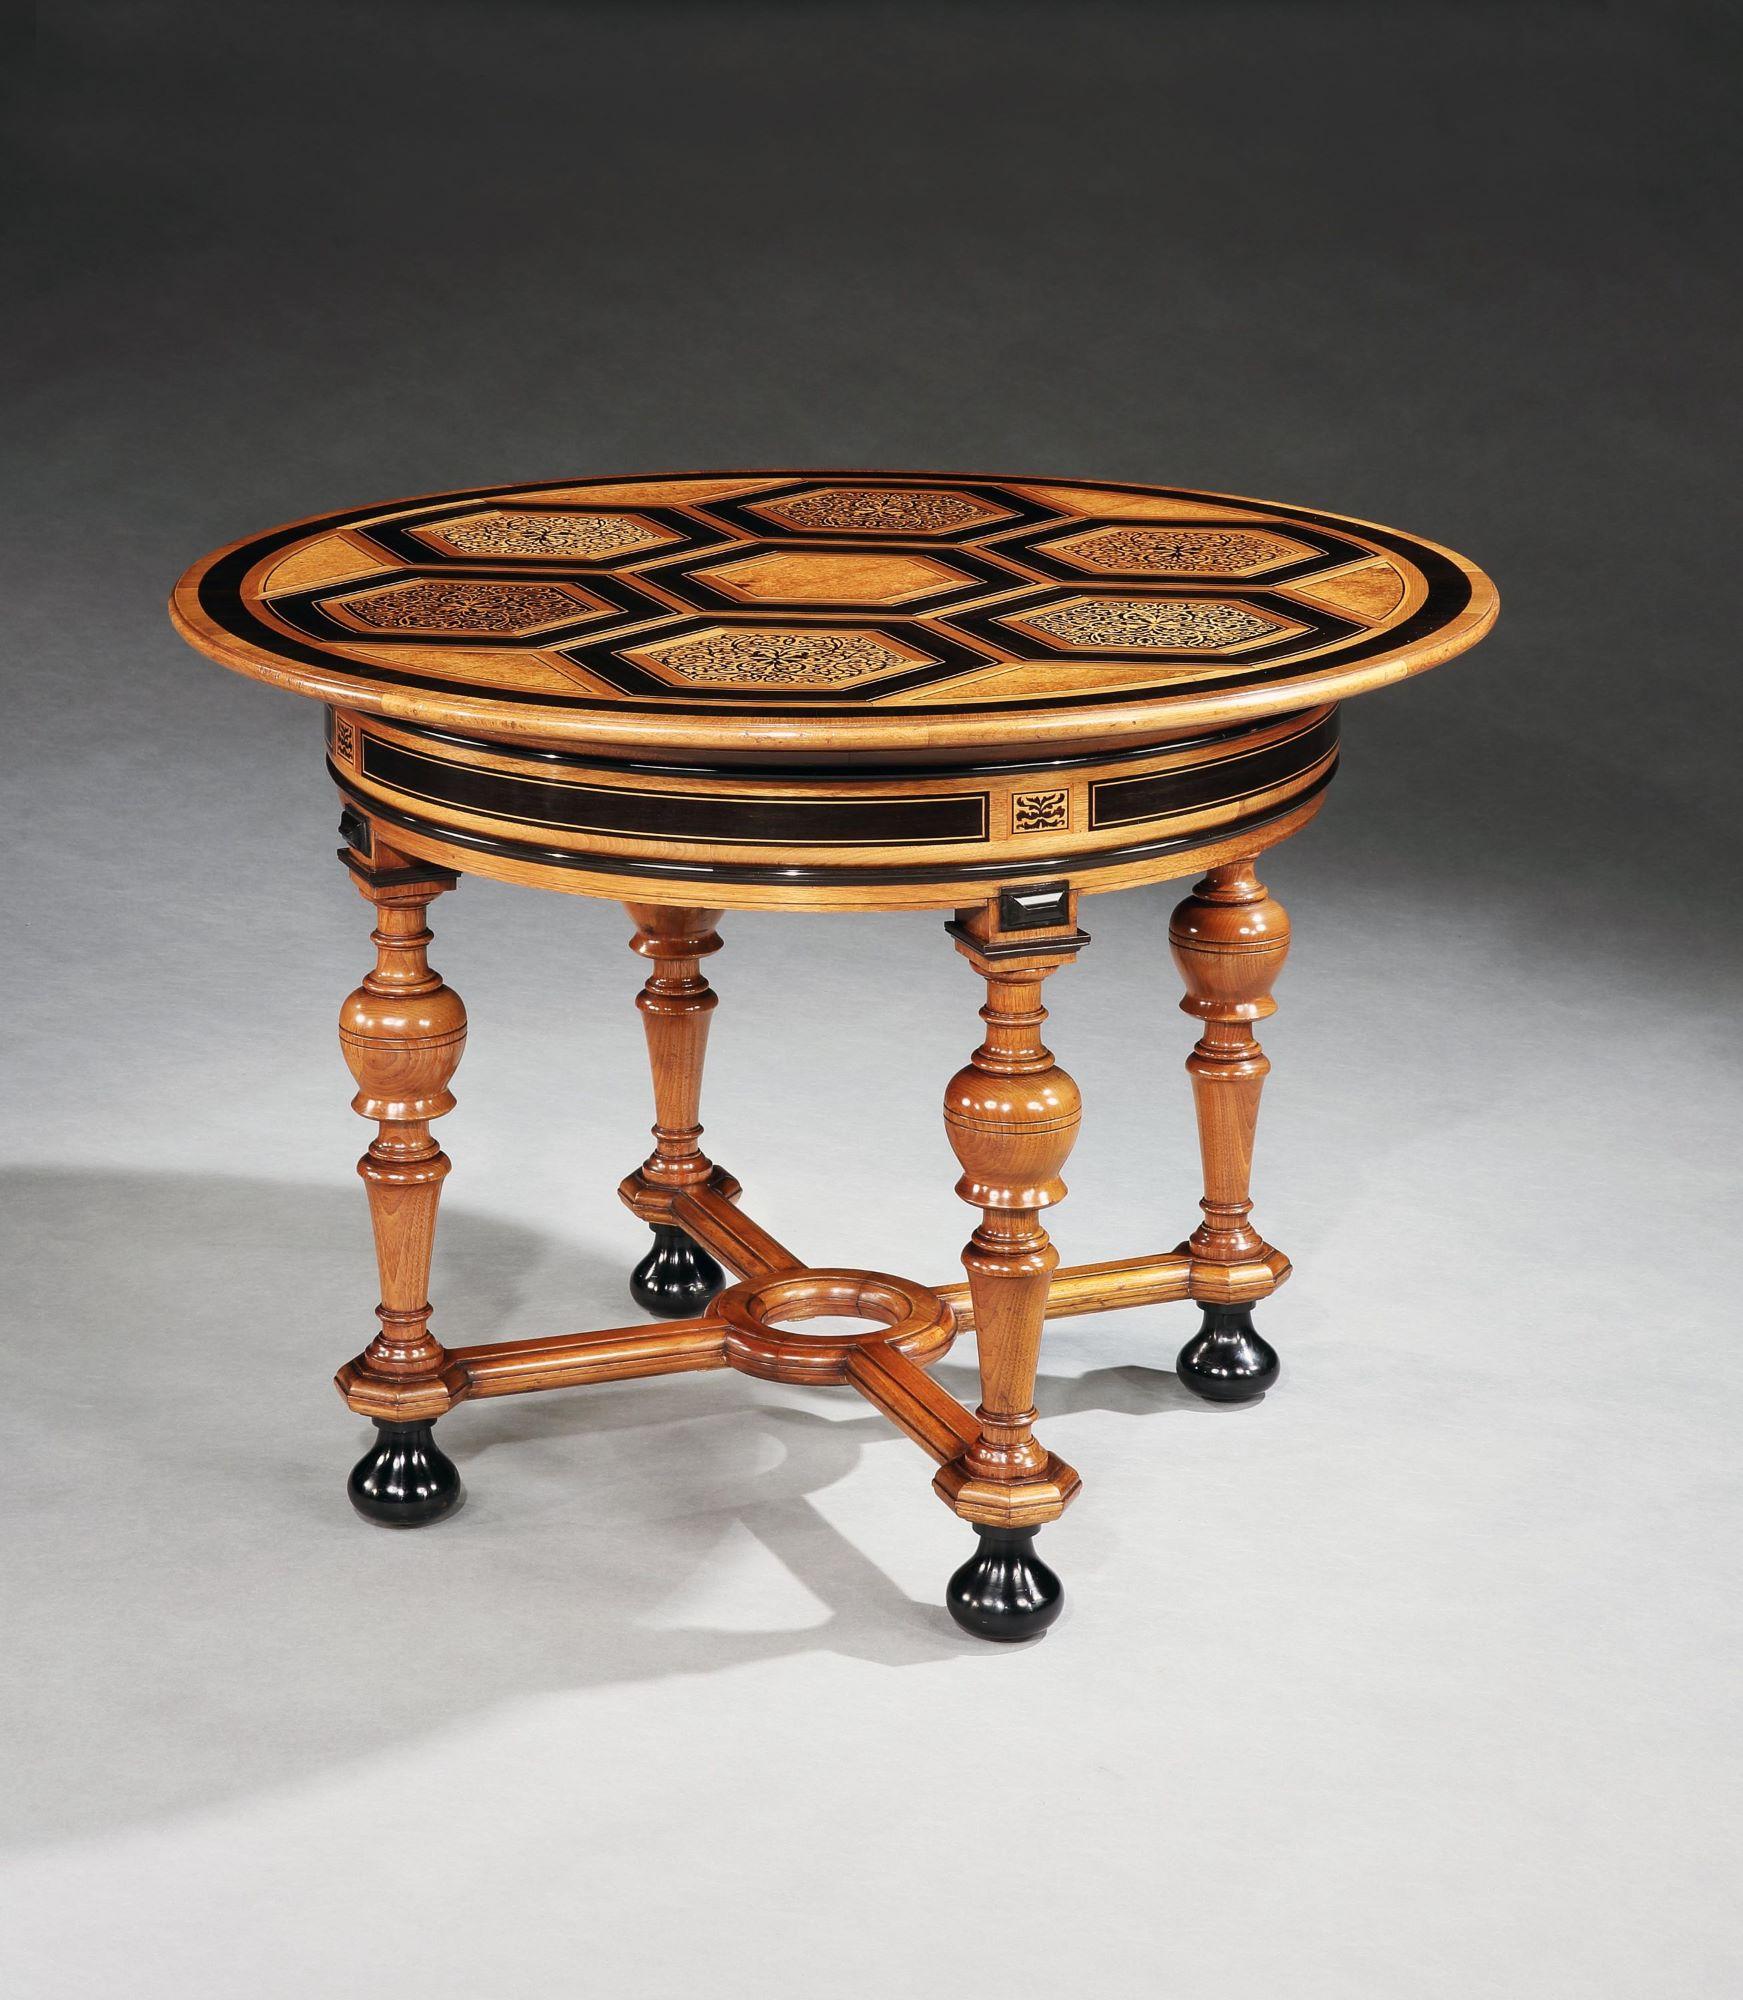 Danish North European Late 19th Century Marquetry Centre Table For Sale